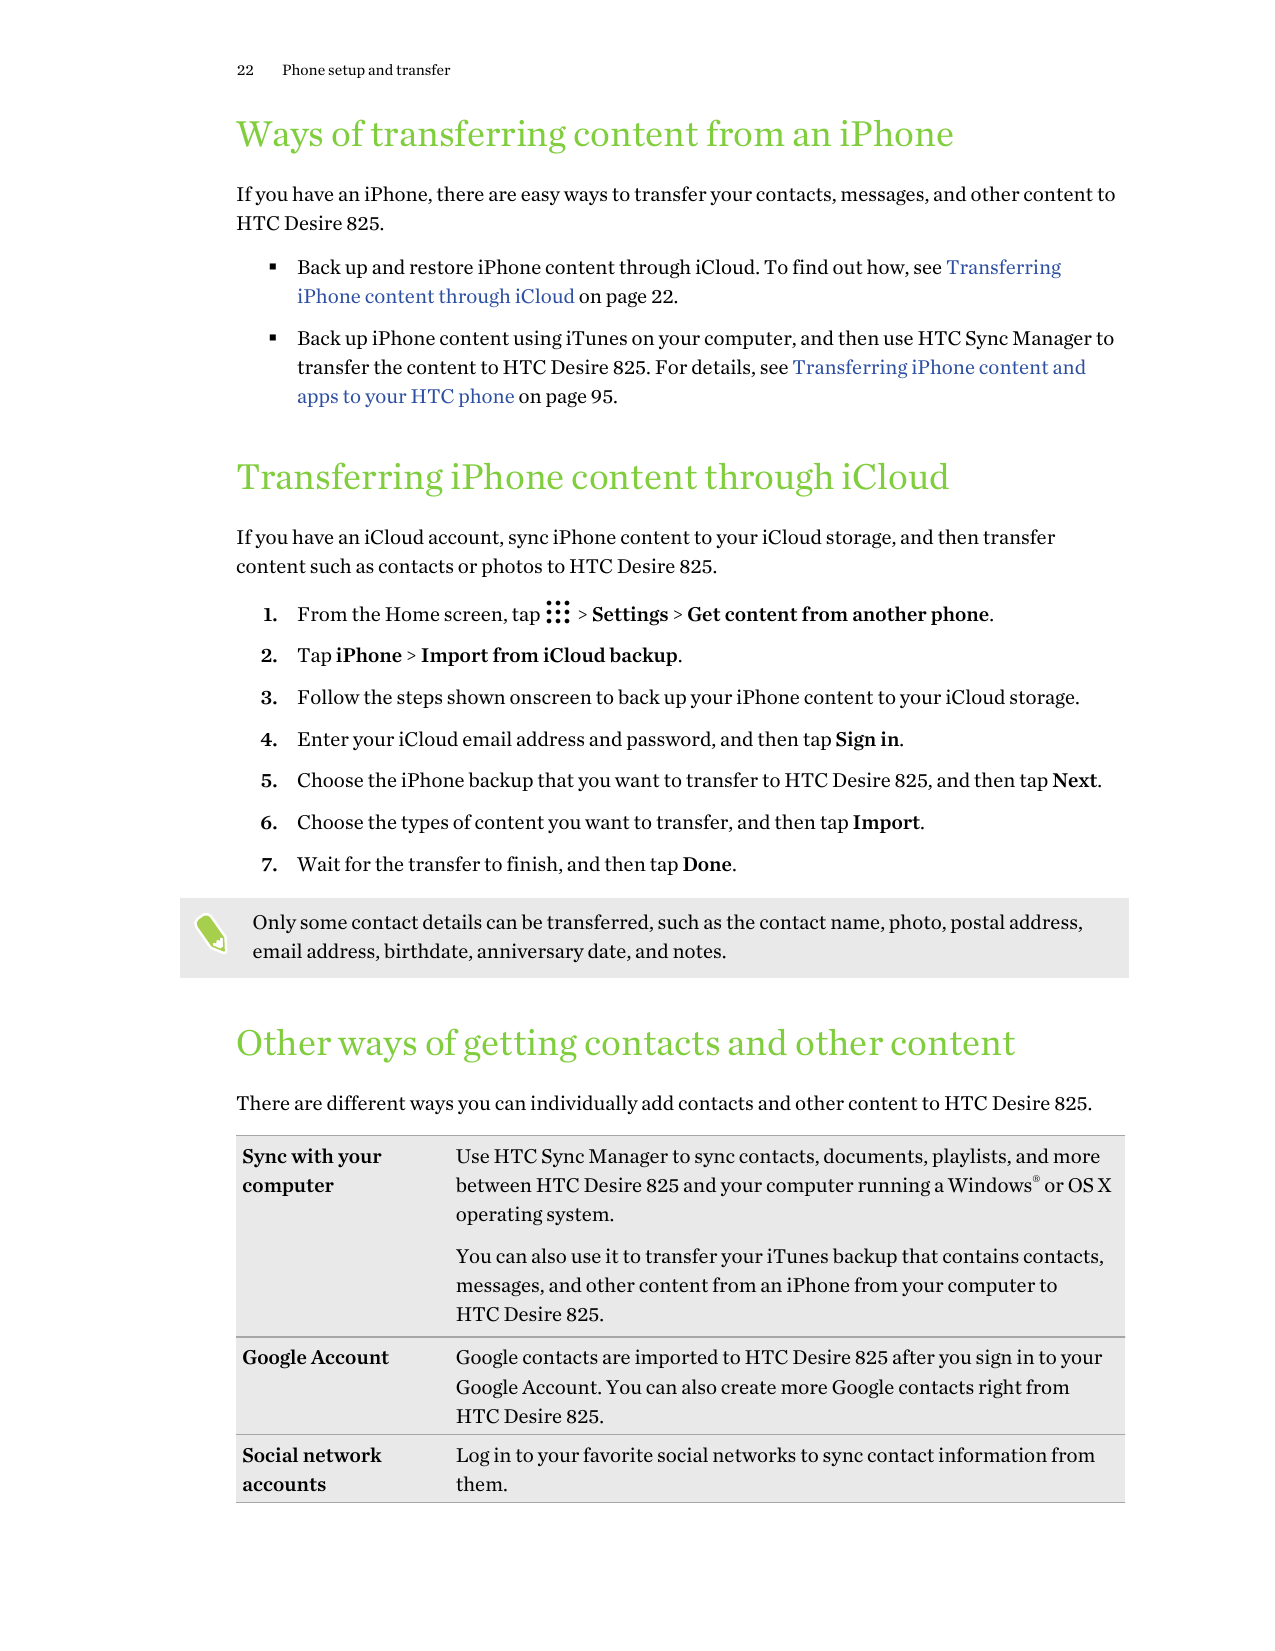 22Phone setup and transferWays of transferring content from an iPhoneIf you have an iPhone, there are easy ways to transfer your